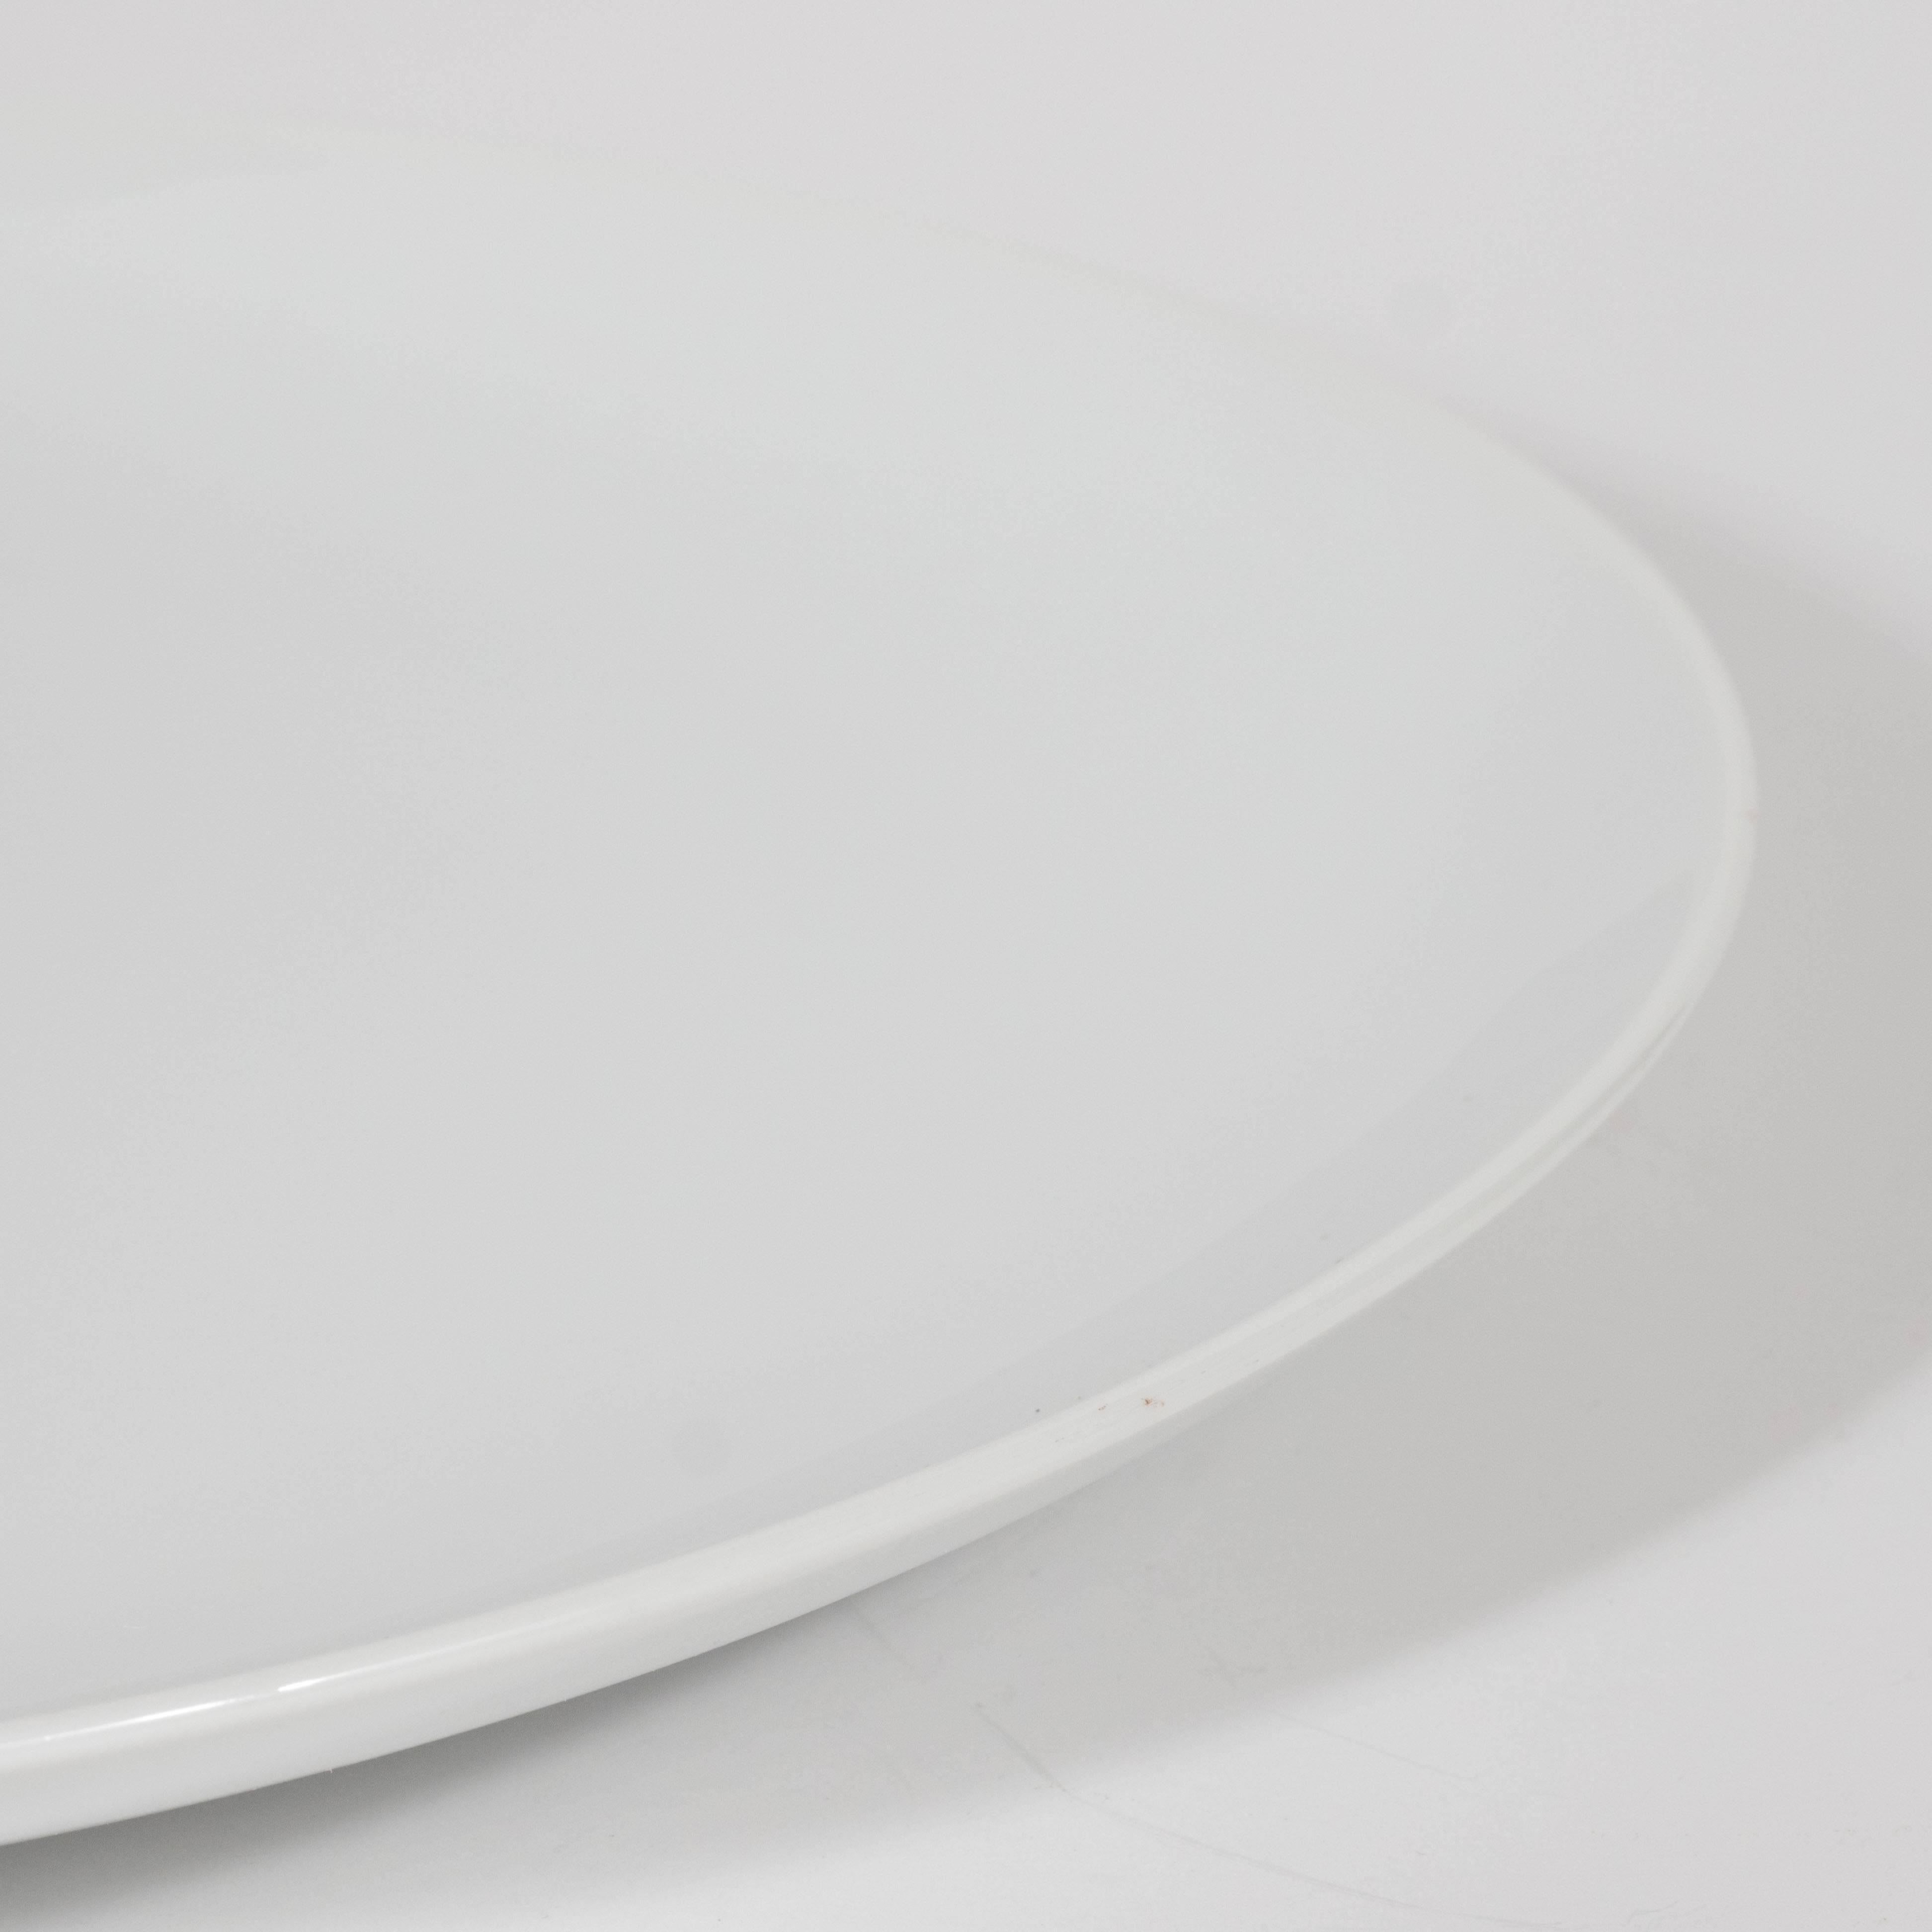 American Three Mid-Century Modern White Ceramic Serving Plate by Tiffany & Co.